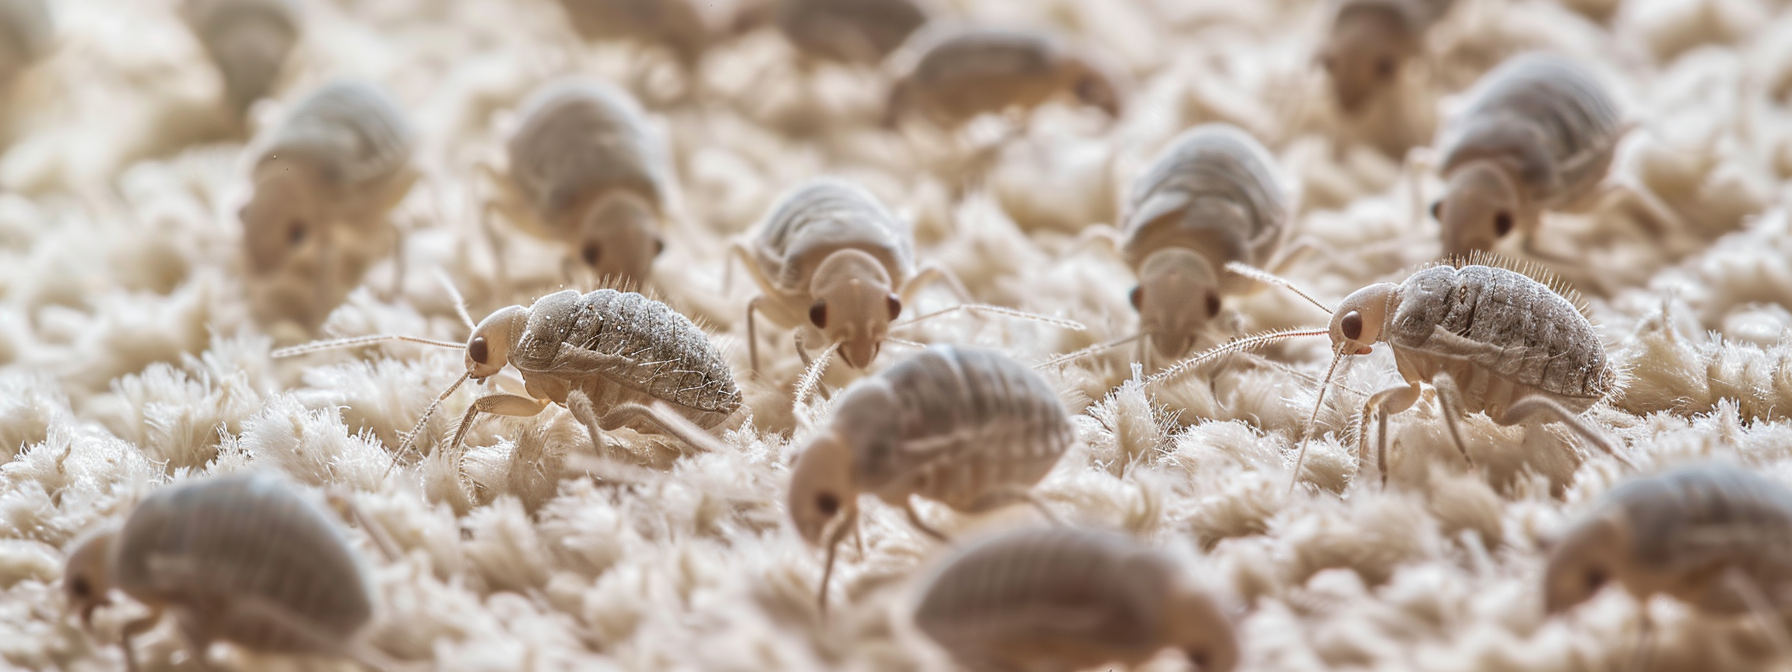 5 Telltale Signs of Dust Mite Infestations in Your Home